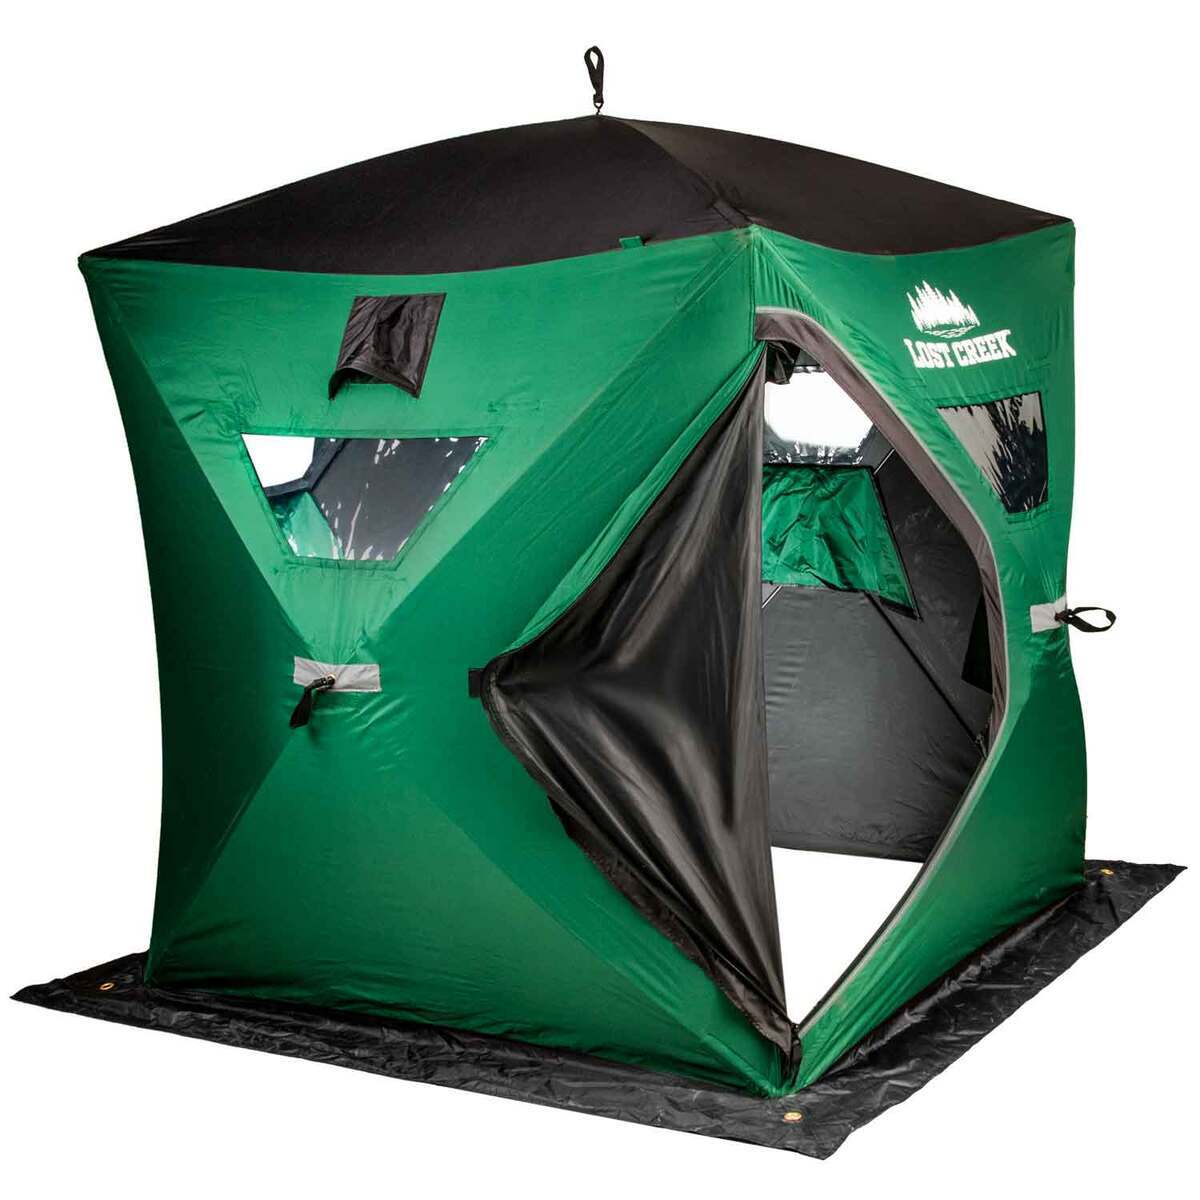 Lost Creek Gale Force 3-Man Hub Ice Fishing Shelter - Green